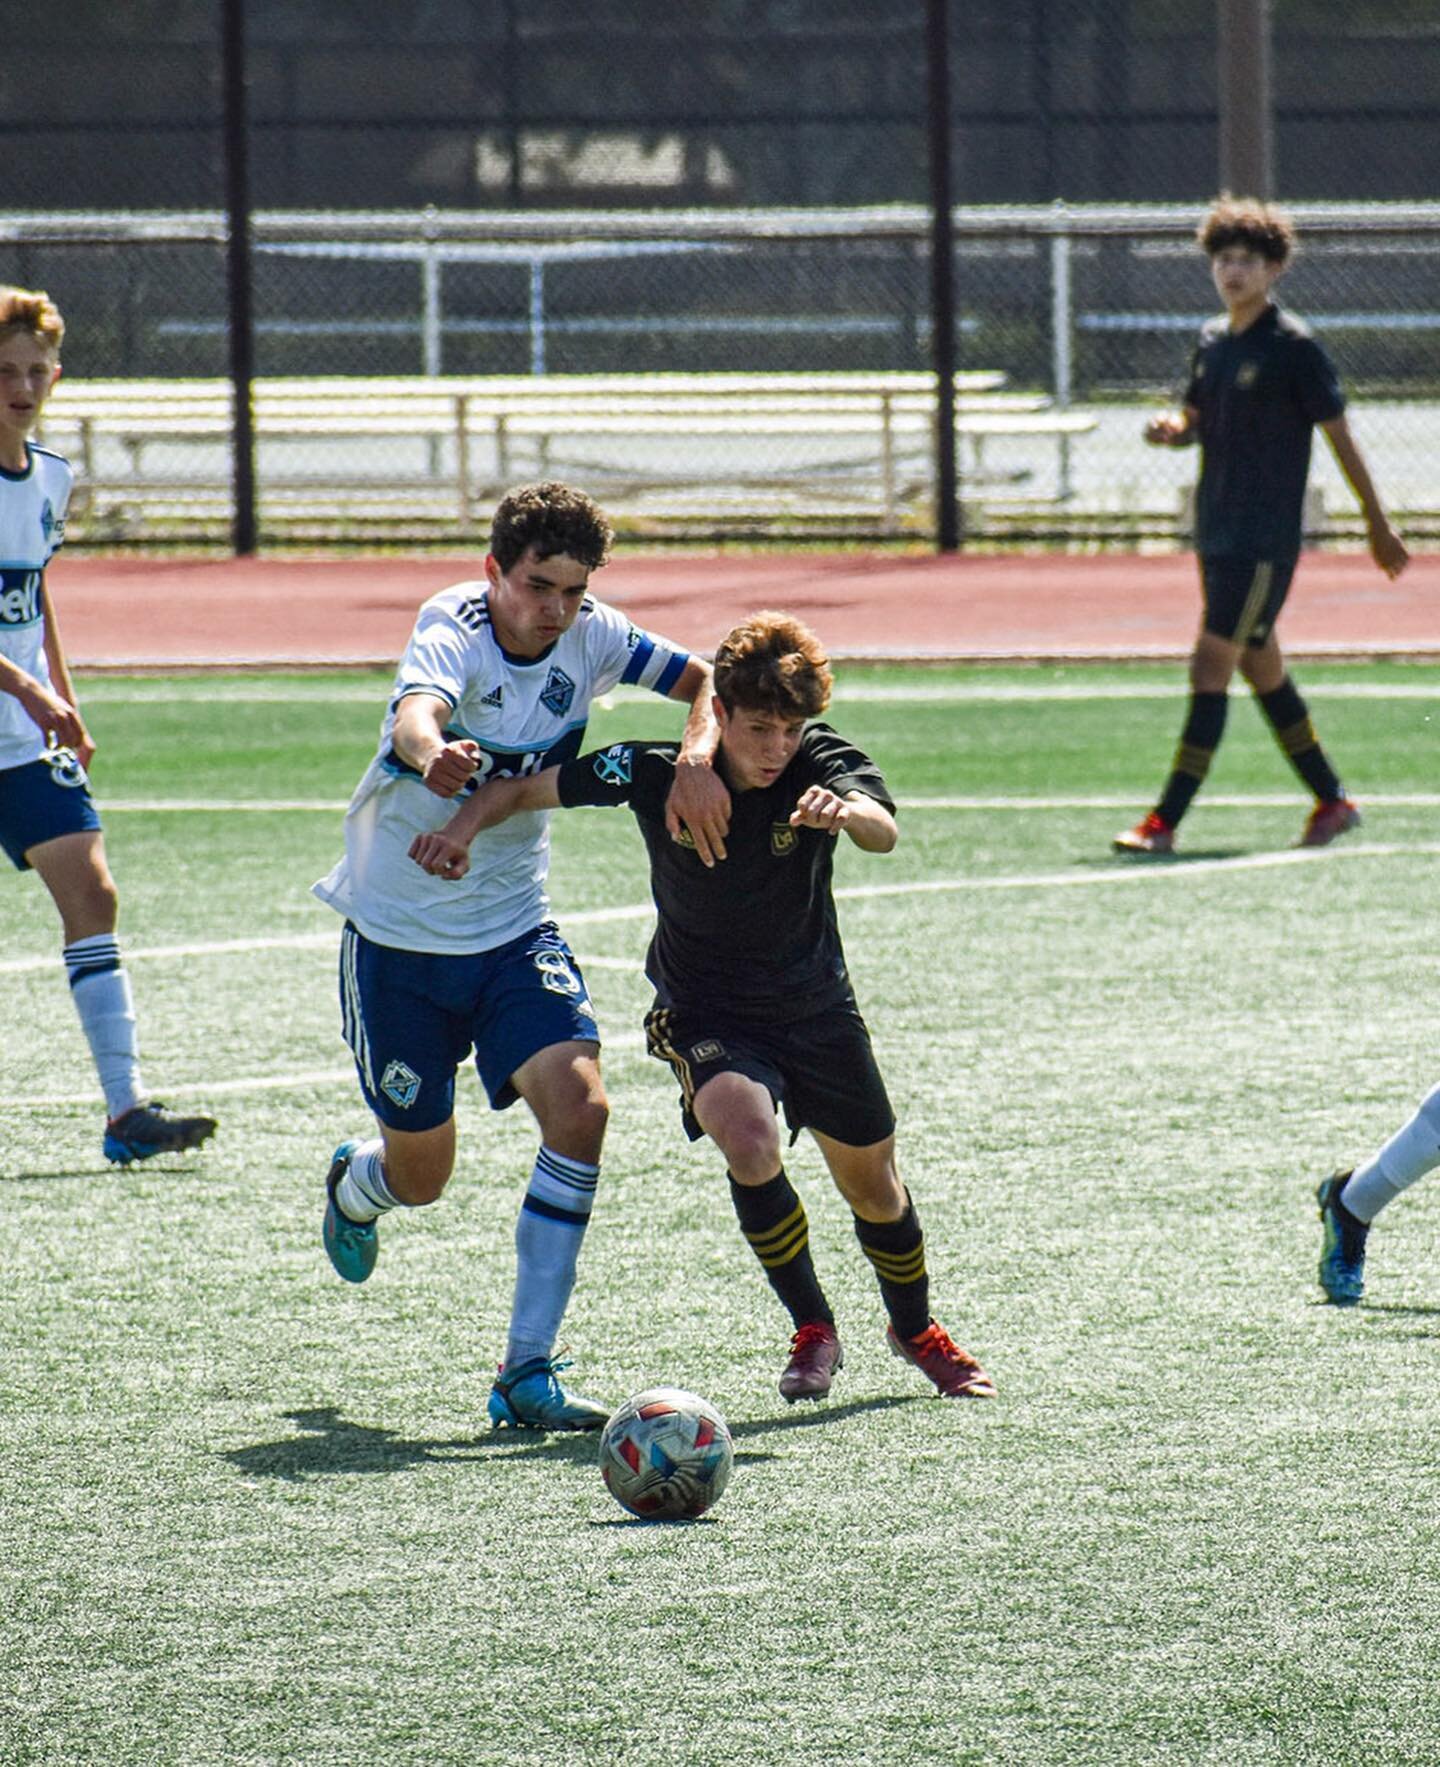 5/29/22: Vancouver Whitecaps FC W 3-0 (2 assists) 
@lafcacademy